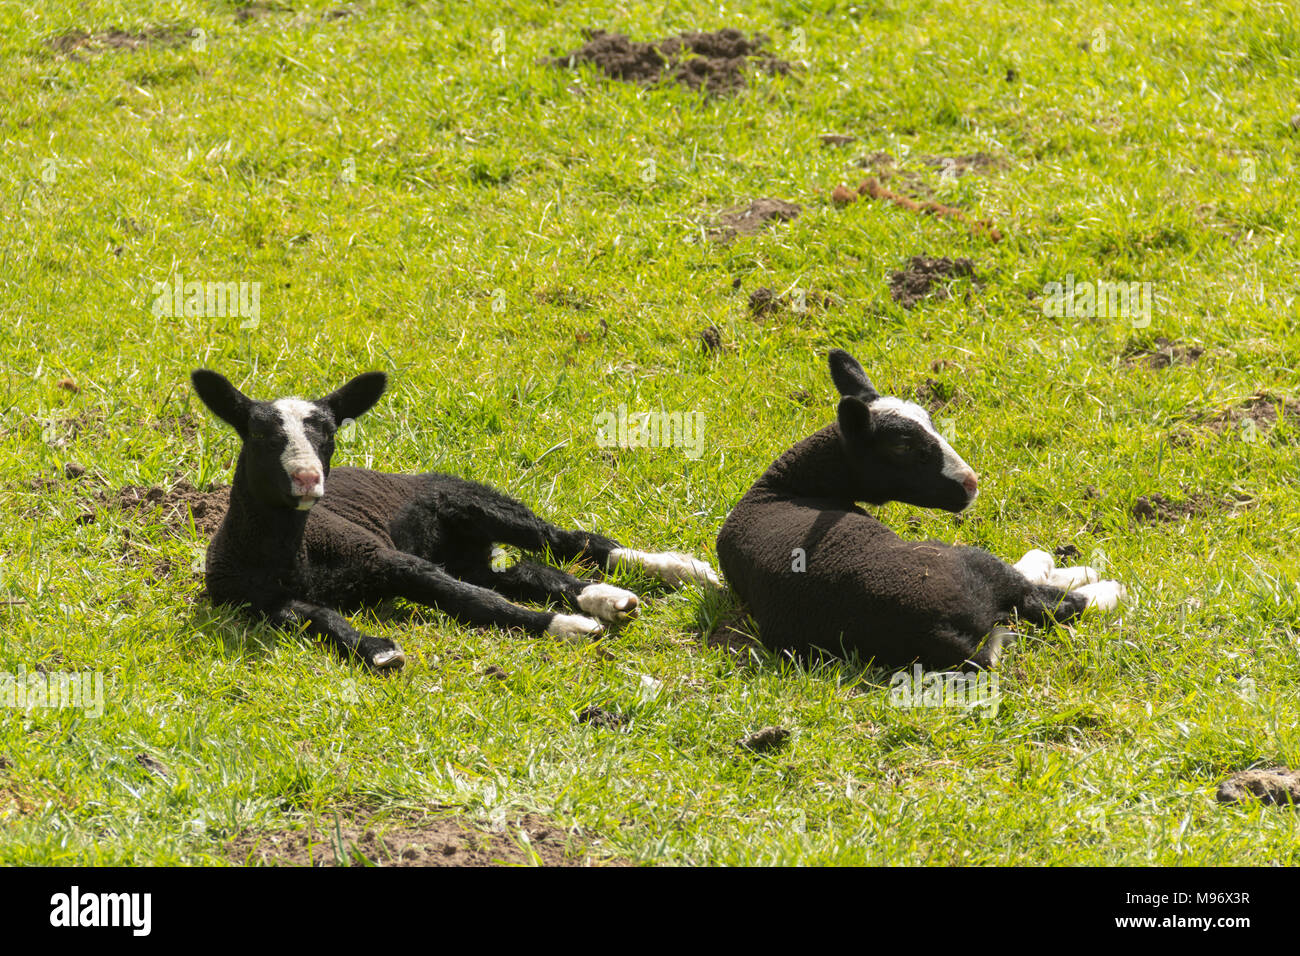 Zwartble lambs in a field in north-west England. Zwartbles originated as a sheep breed in the Friesland region of the Netherlands. Stock Photo